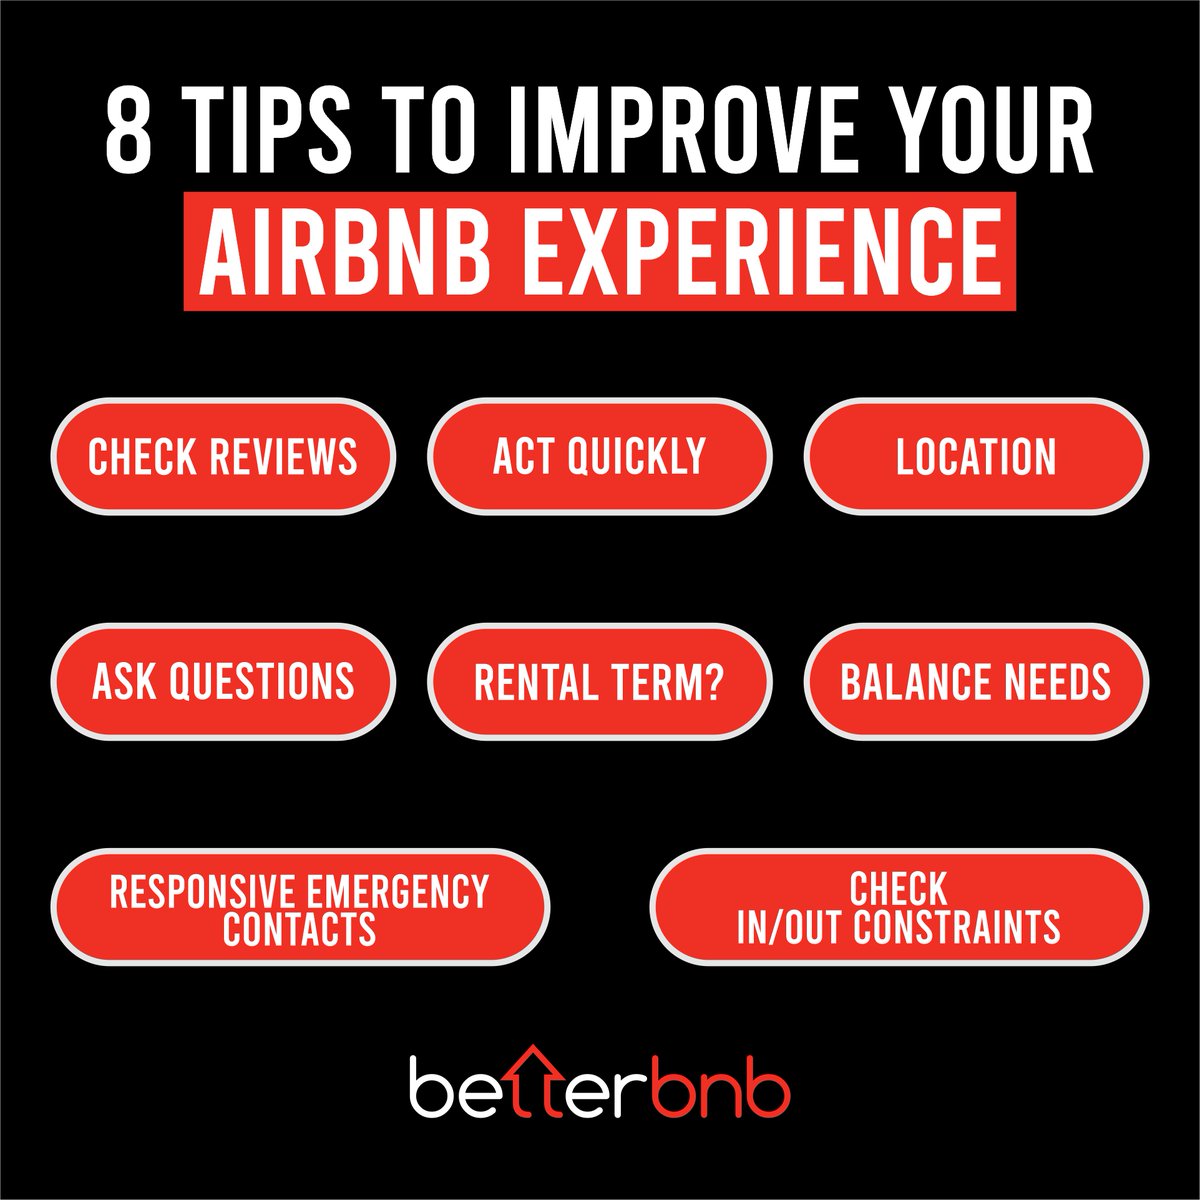 Some Tips Might Help To Improve Your Airbnb Experience.

#airbnbtips #travelsmart #staywithconfidence #hostwithheart #airbnbadventure #guestwisdom #homeawayfromhome #travelhacks #happyhosting #explorewithease #airbnbinsider #vacationsuccess #traveltips #airbnbmagic